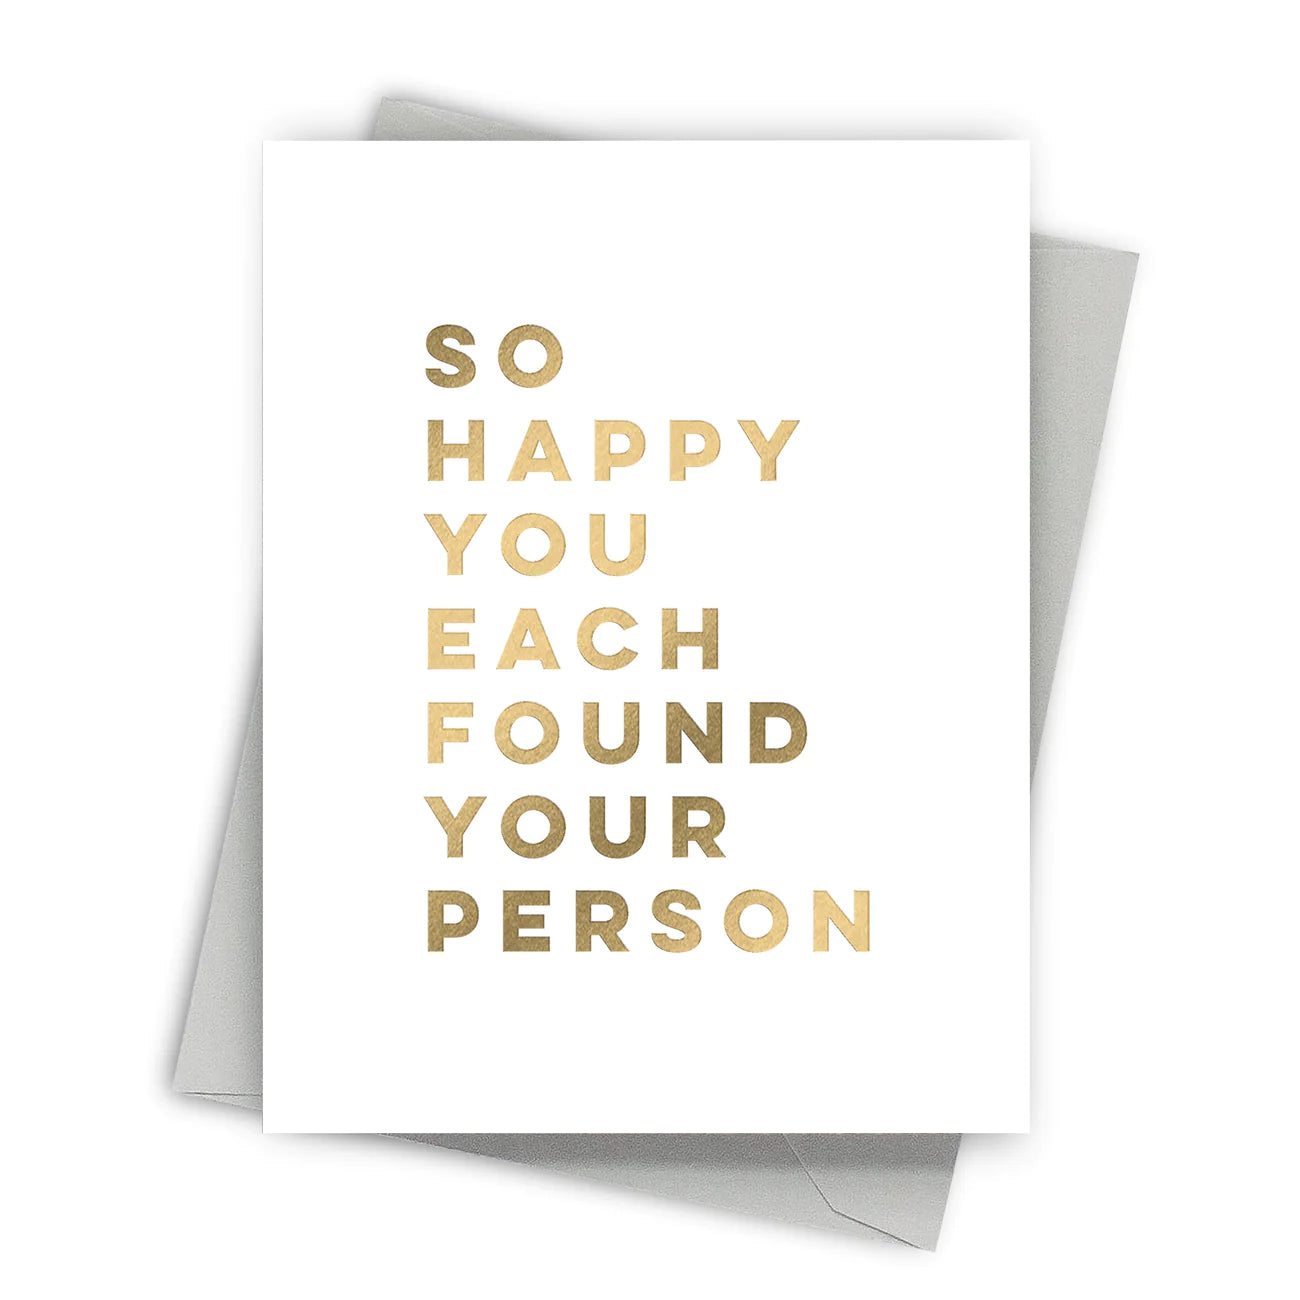 Your Person Greeting Card